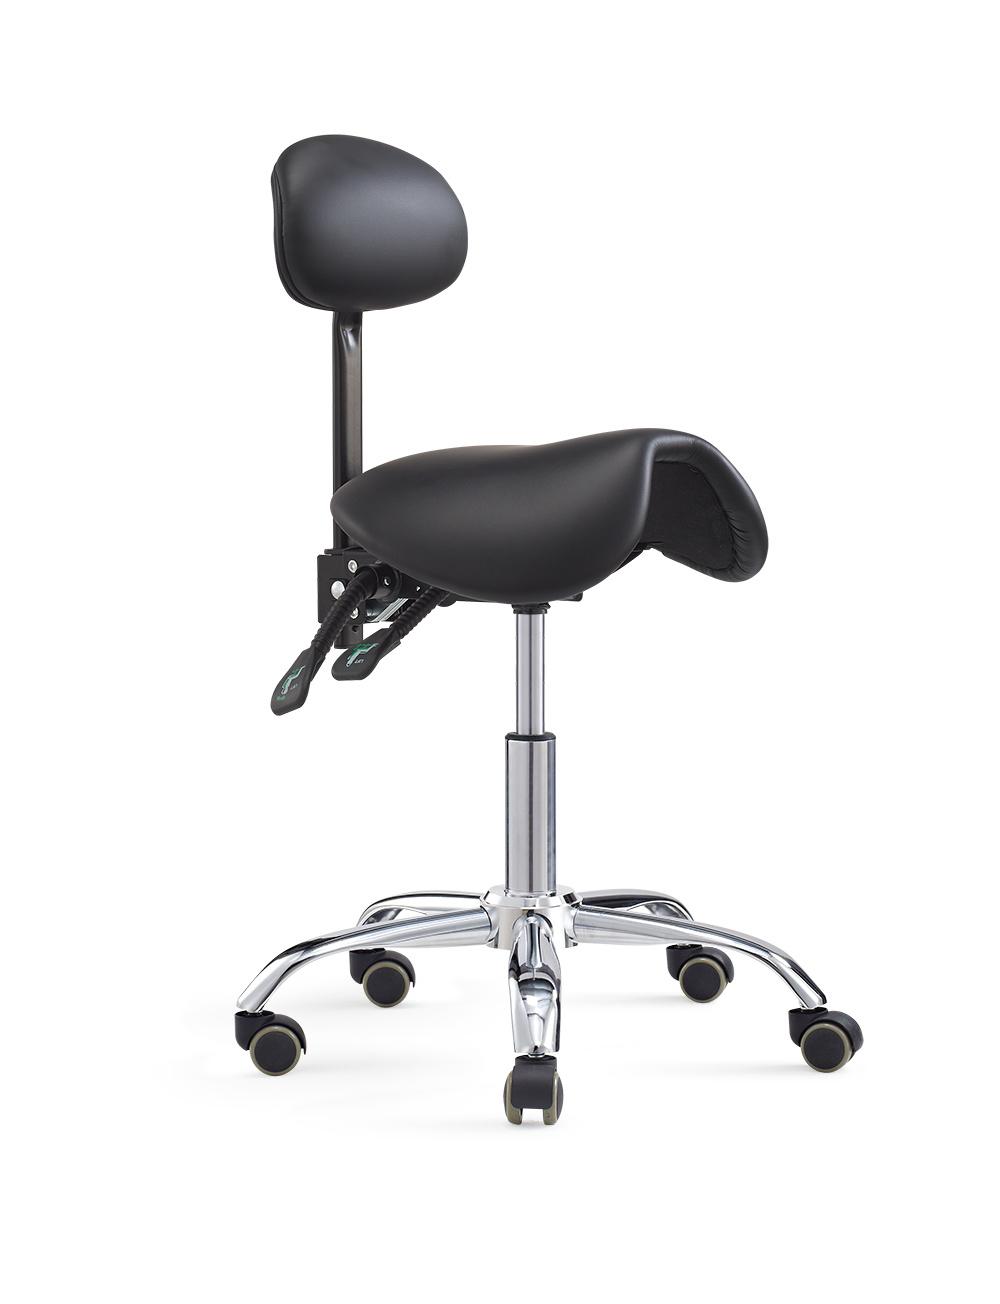 Haiyue Hot Sell New Design Saddle Seat Stool Office Chair